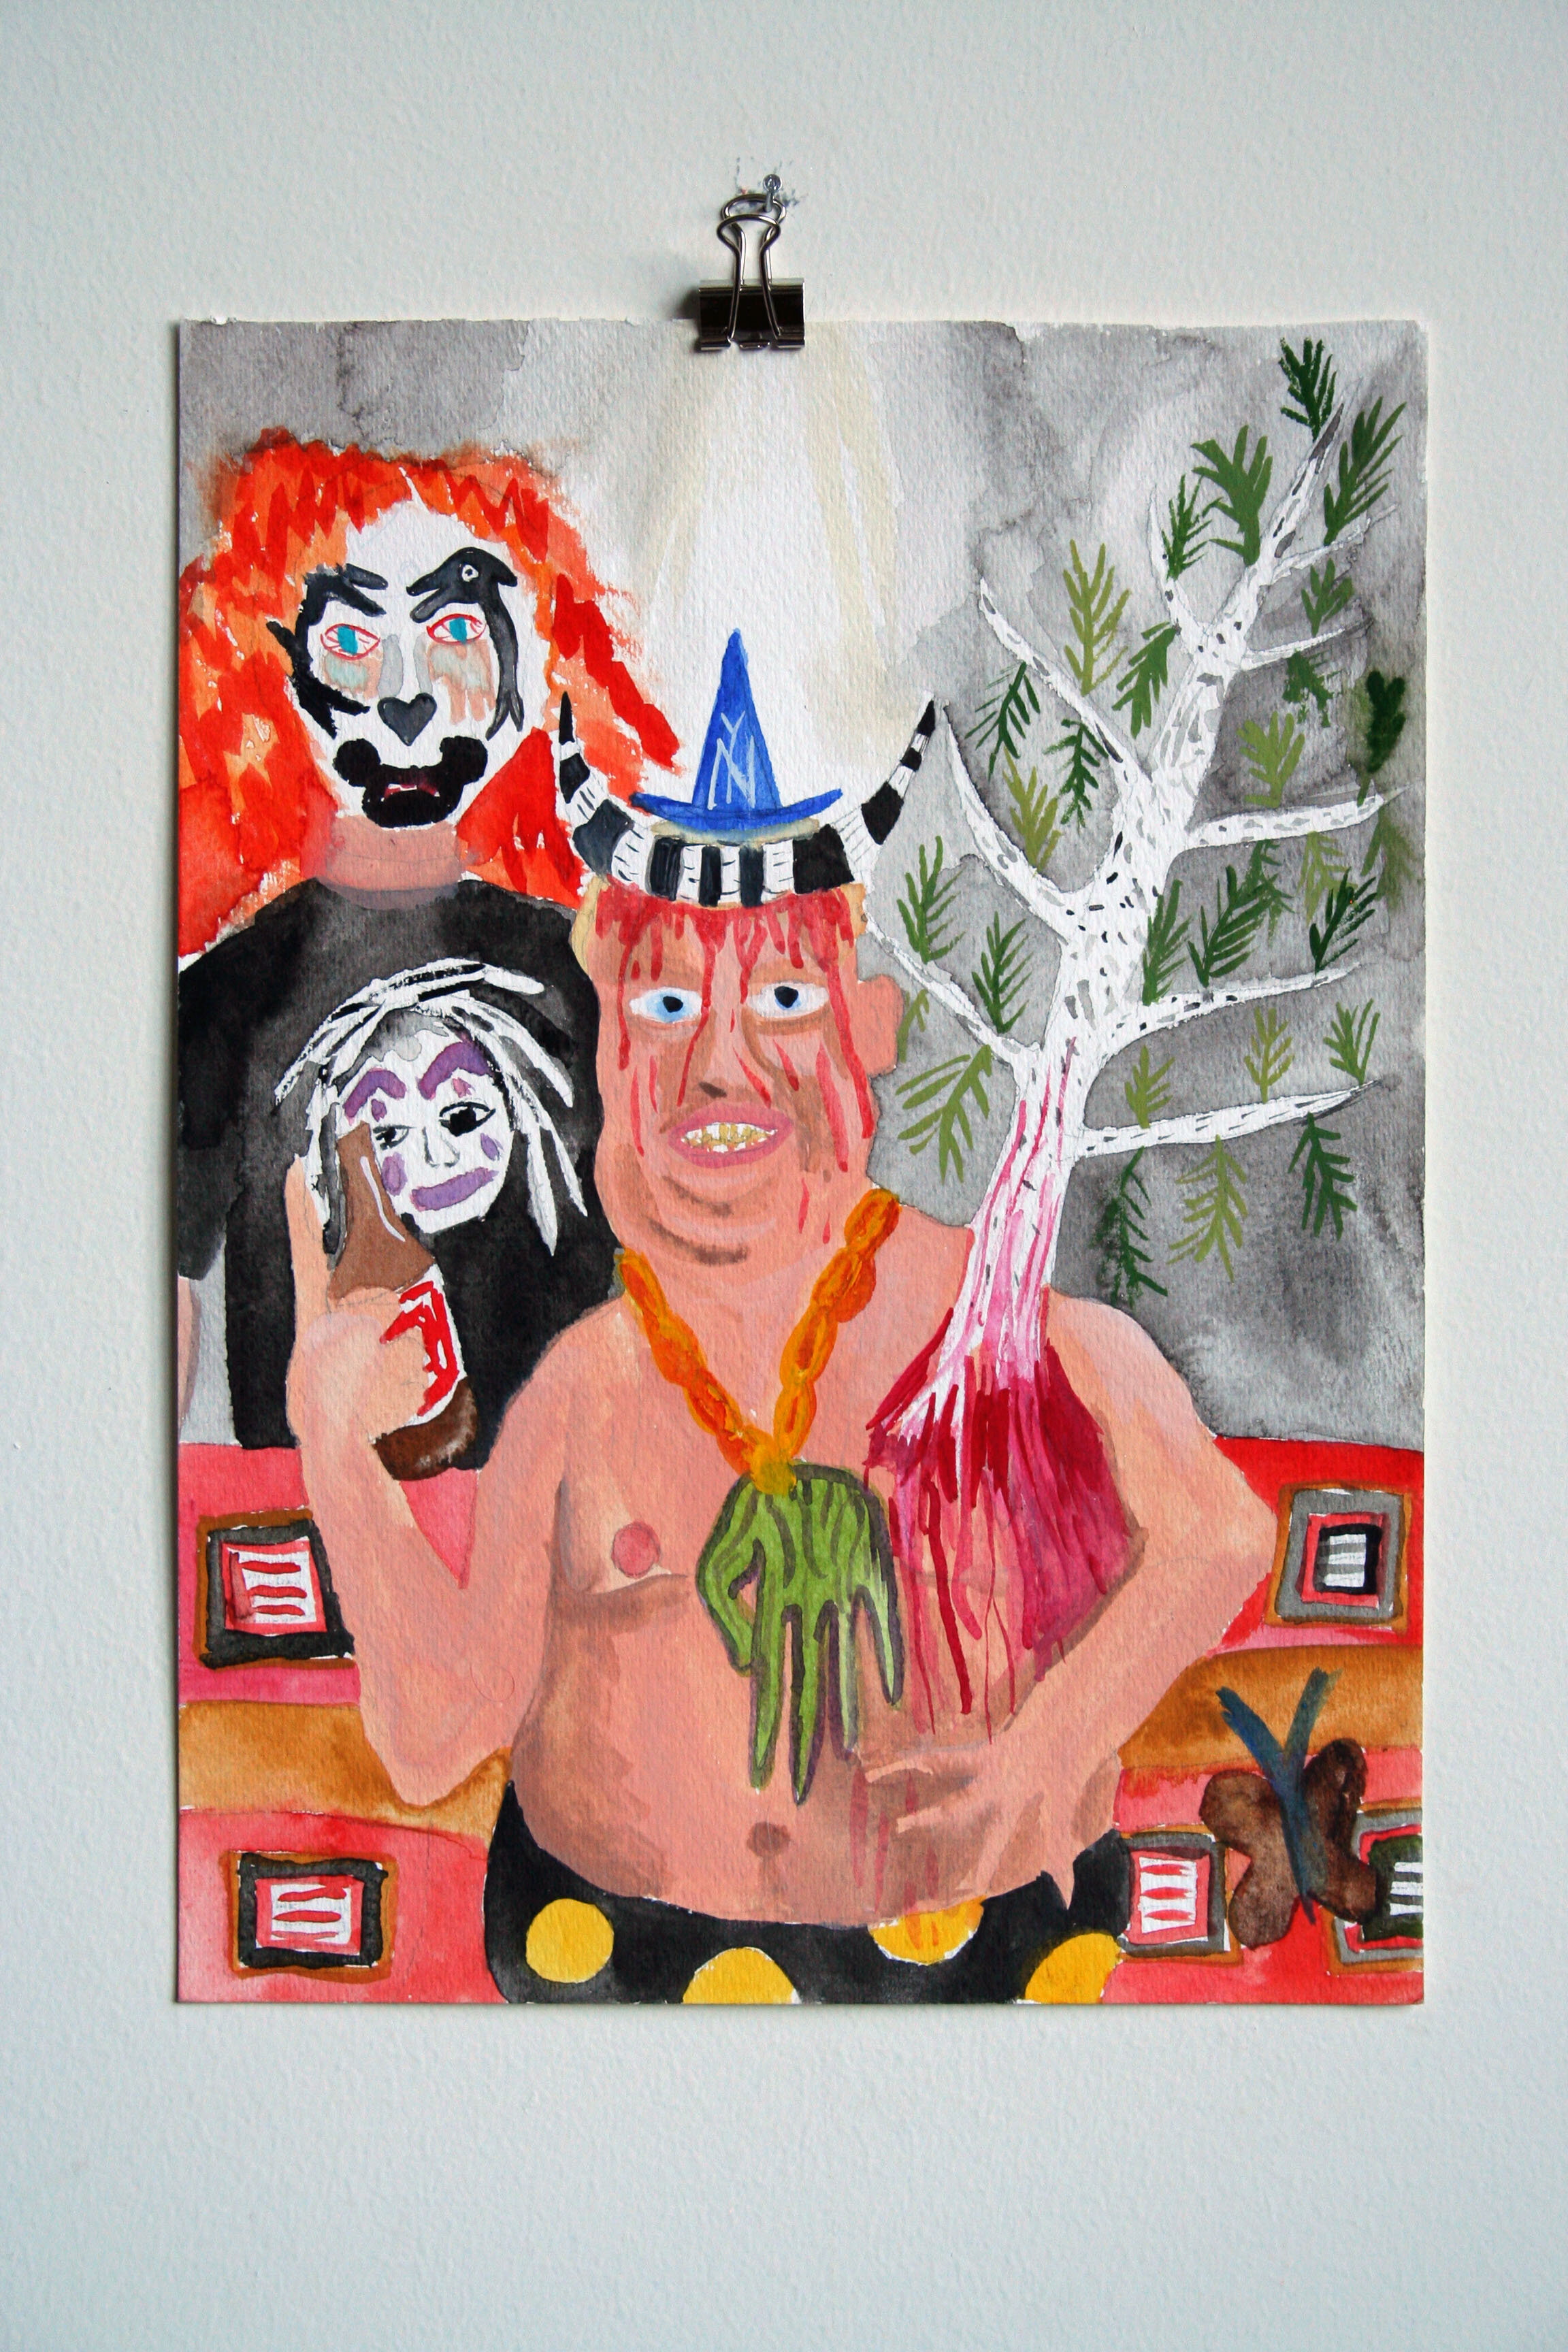   R.I.P. American Dream (For Dusty Rhodes) , 2015  12 x 9 inches (30.48 x 22.86 cm.)  Watercolor on paper 